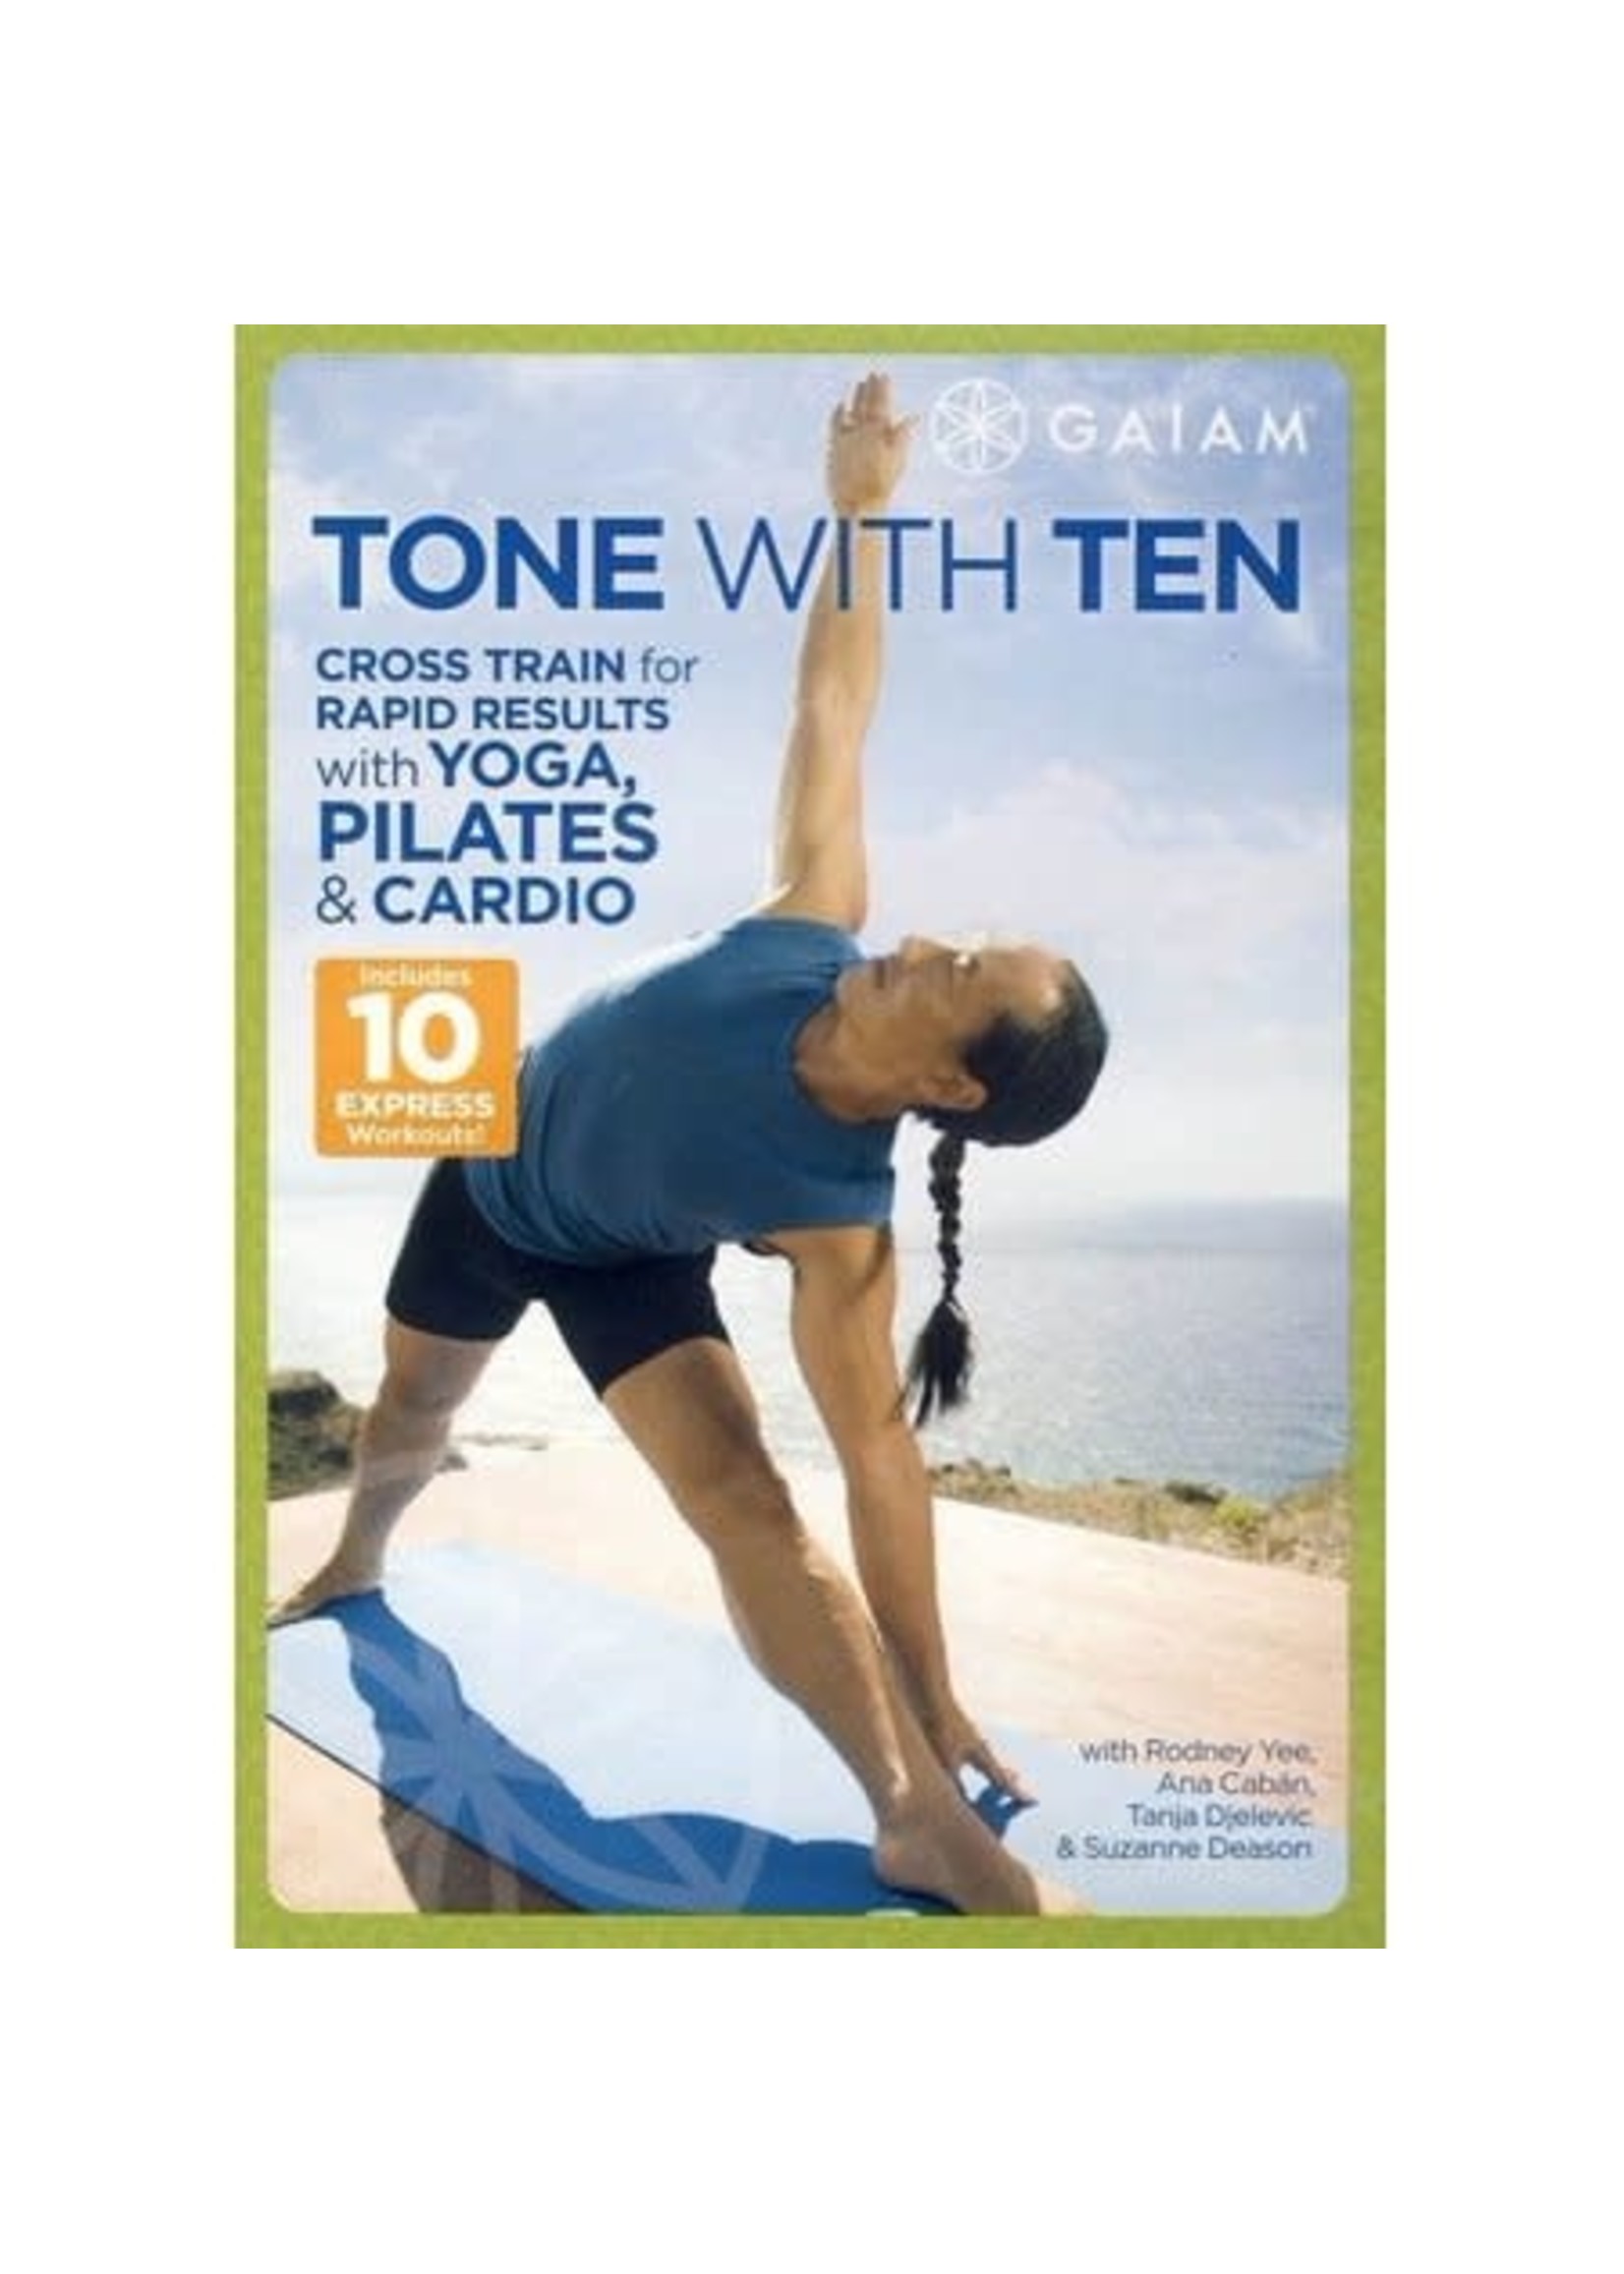 Gaiam Tone with Ten - Cross Train for Rapid Results with Yoga, Pilates & Cardio - Includes 10 Express Workouts